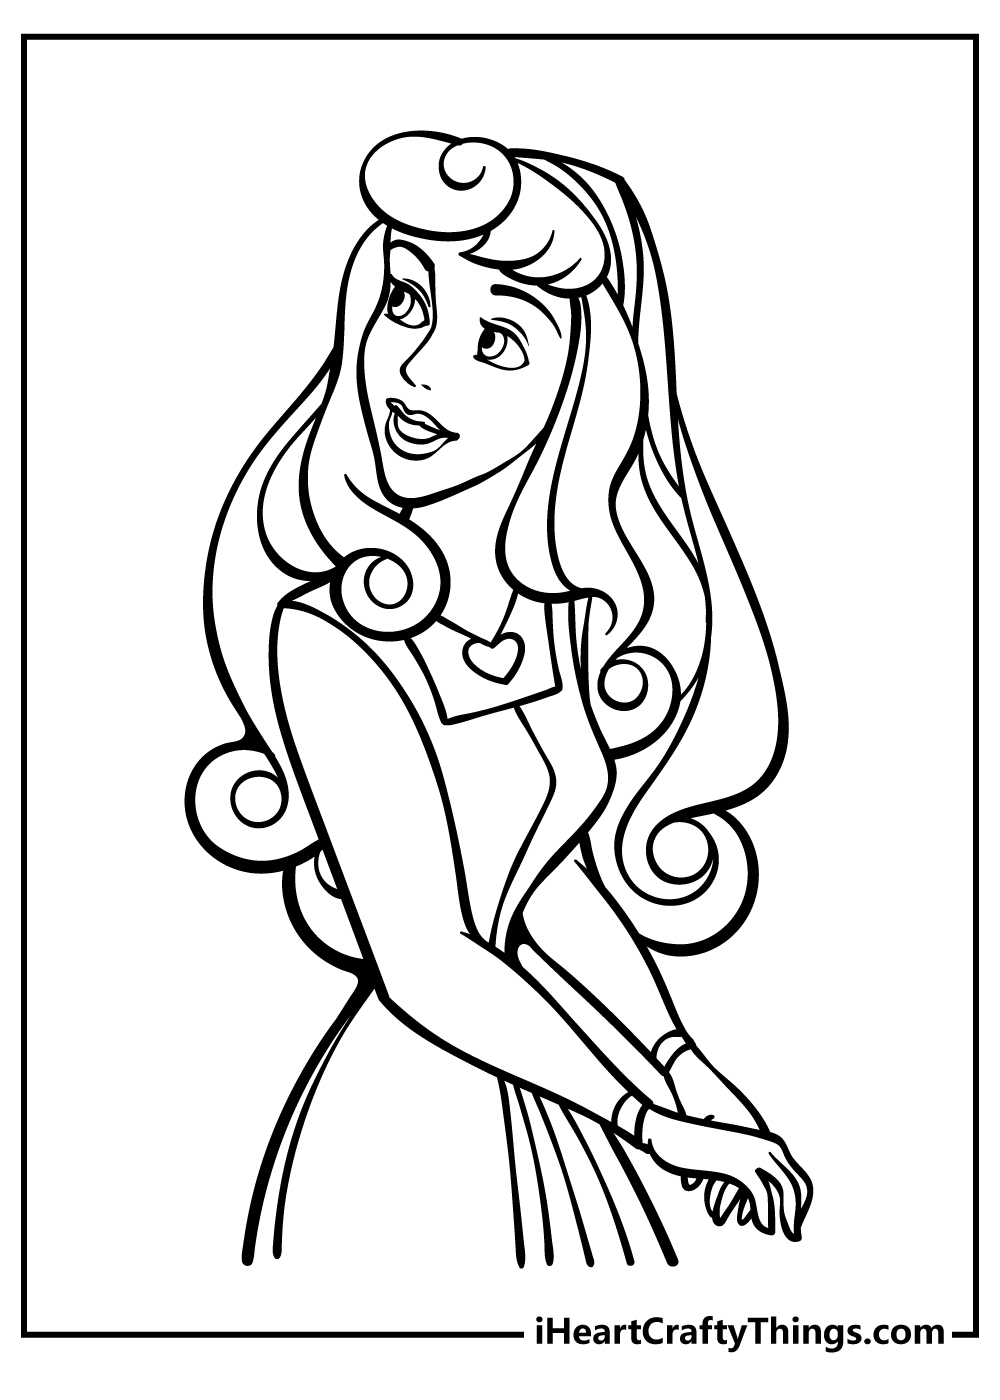 Sleeping Beauty Coloring Pages free pdf download